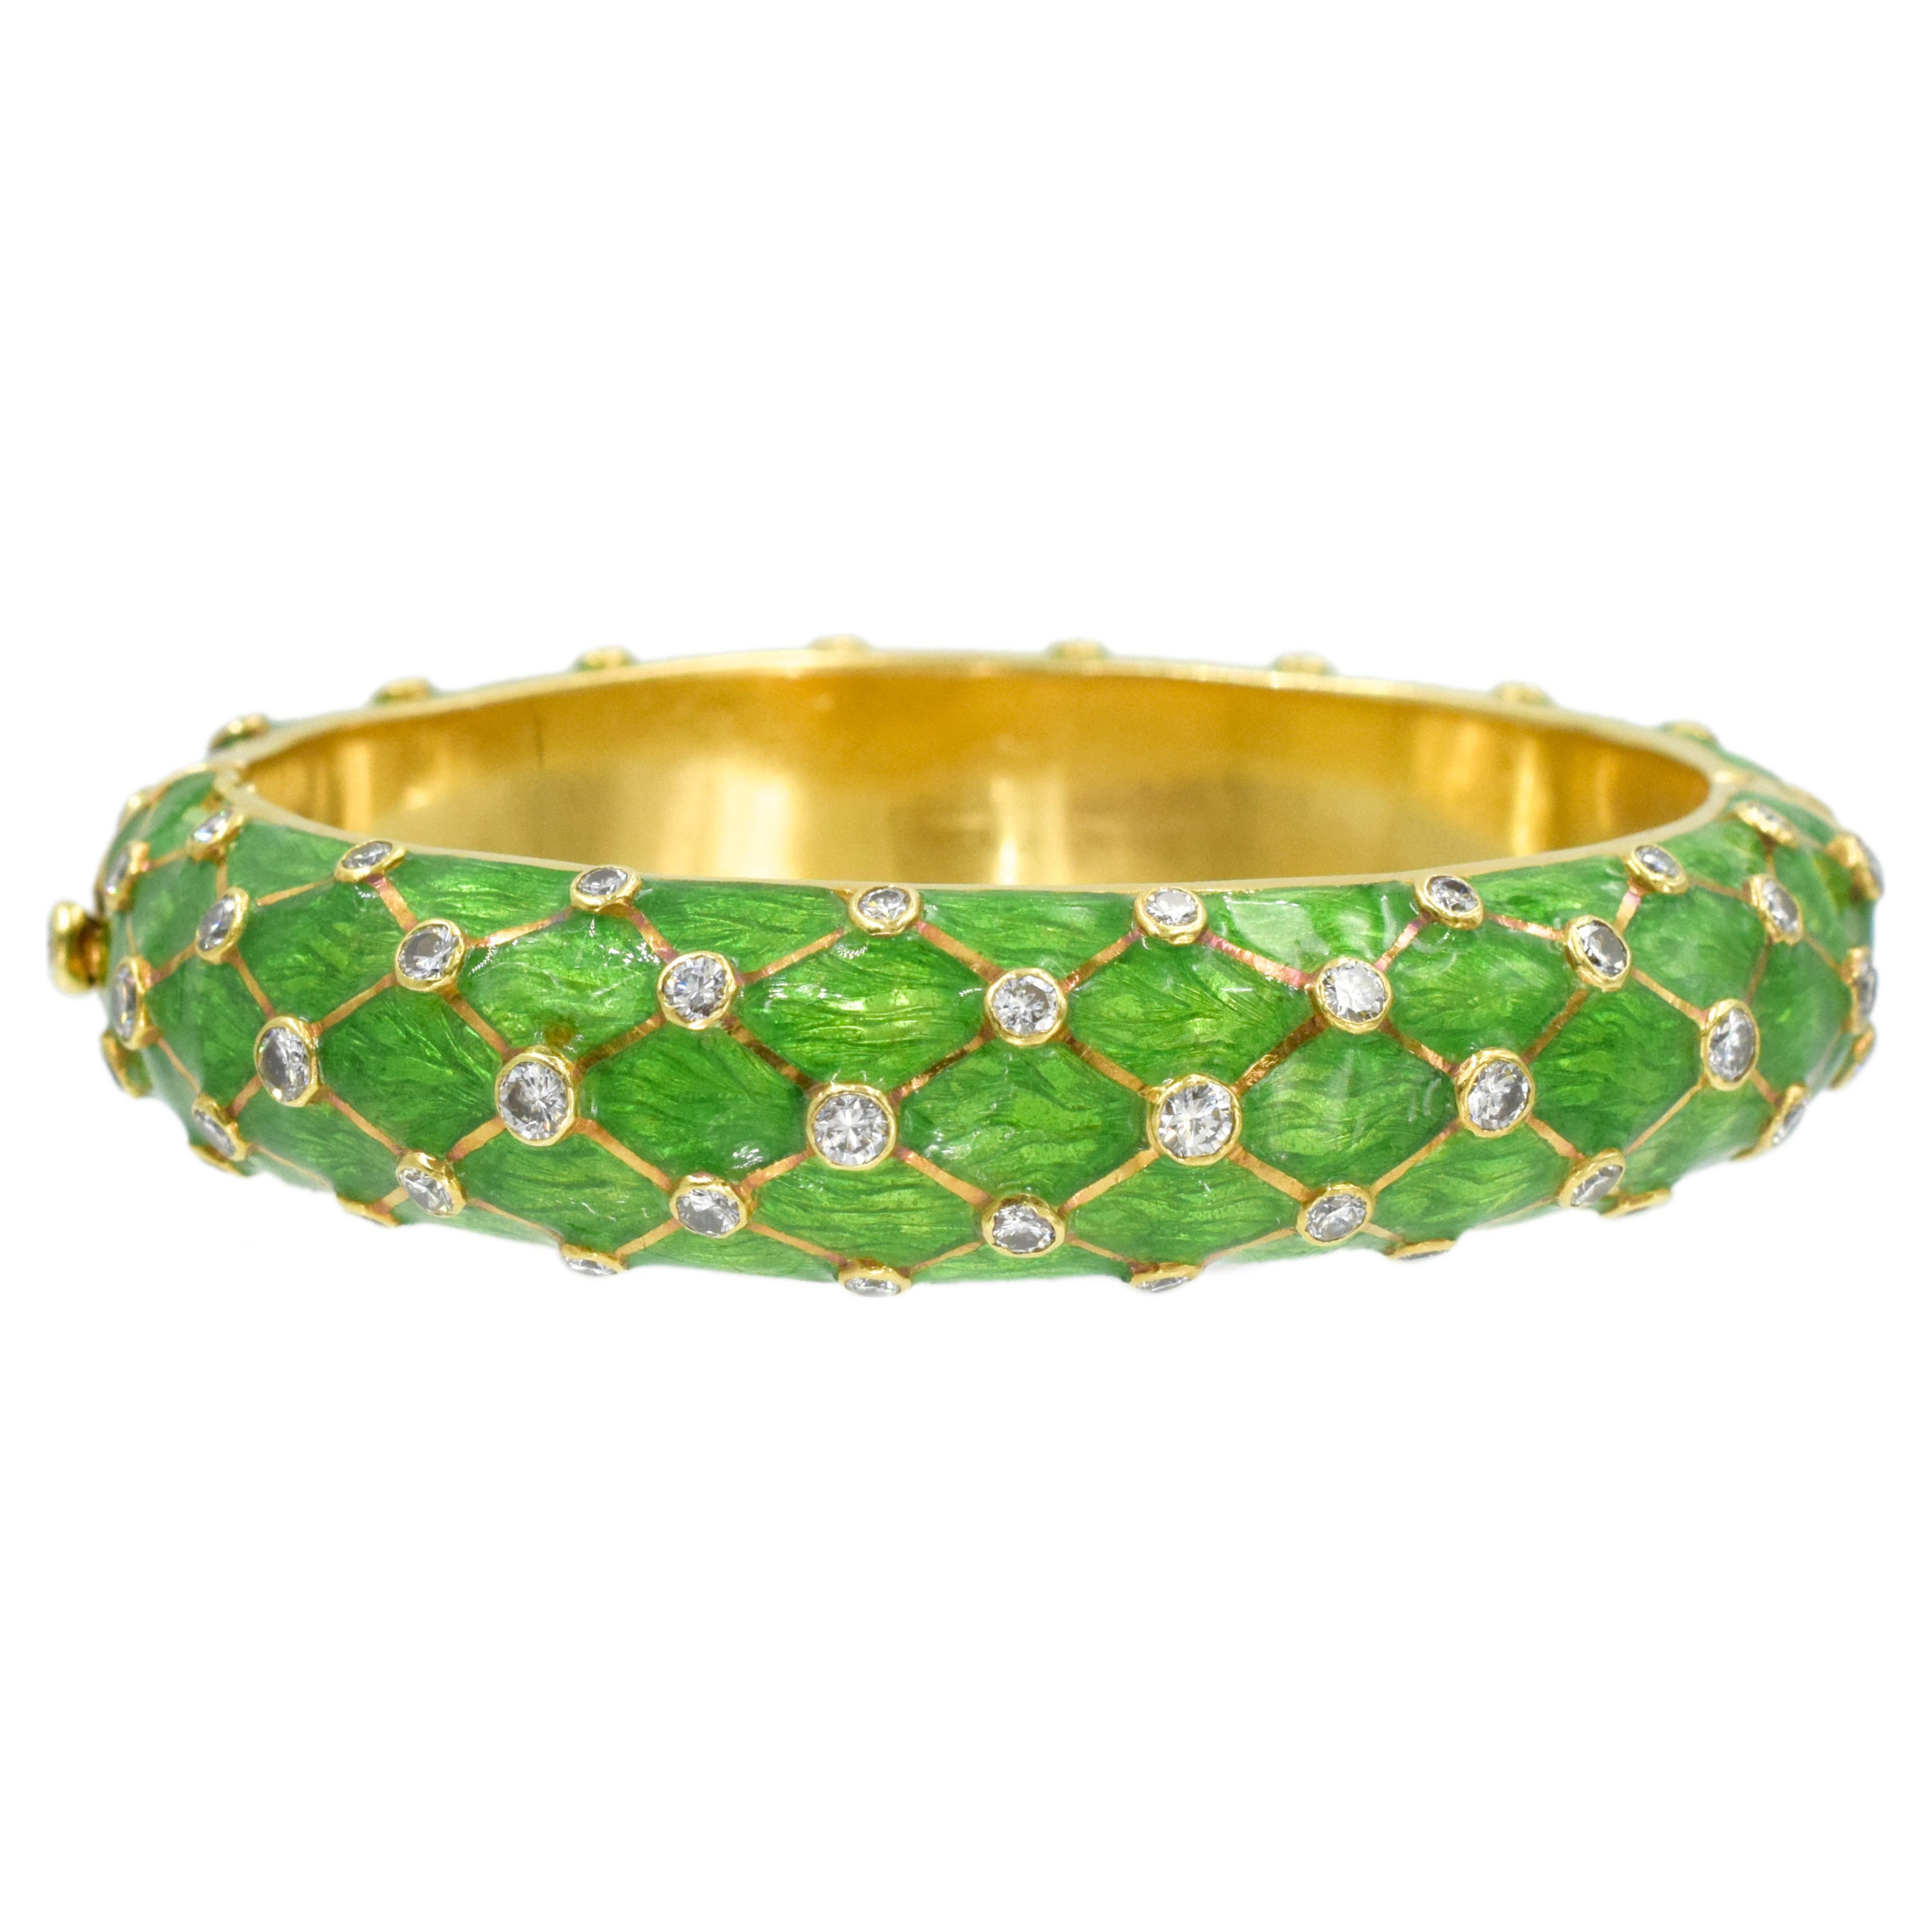 Tiffany & Co. Gold, Green Enamel and Diamond Bangle Bracelet
This bangle bracelet has the bombé bangle applied with patterned apple green enamel, continuously set with diagonal rows of 85 collet-set round diamonds ap. 3.20 cts., joined by